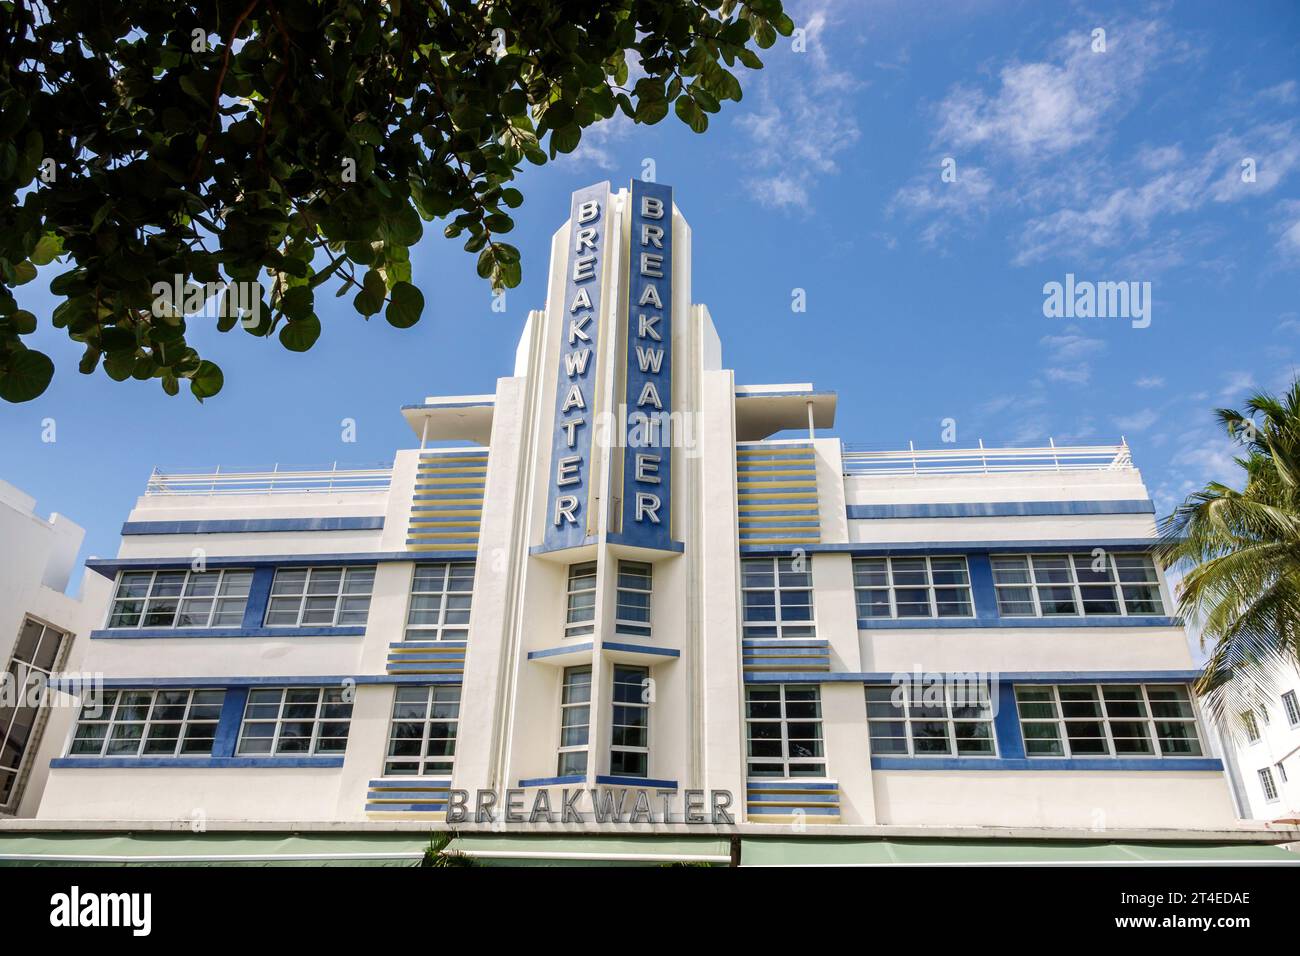 Miami Beach Florida,outside exterior,building front entrance hotel,Ocean Drive,Hotel Breakwater South Beach sign,Art Deco style architecture,hotels mo Stock Photo